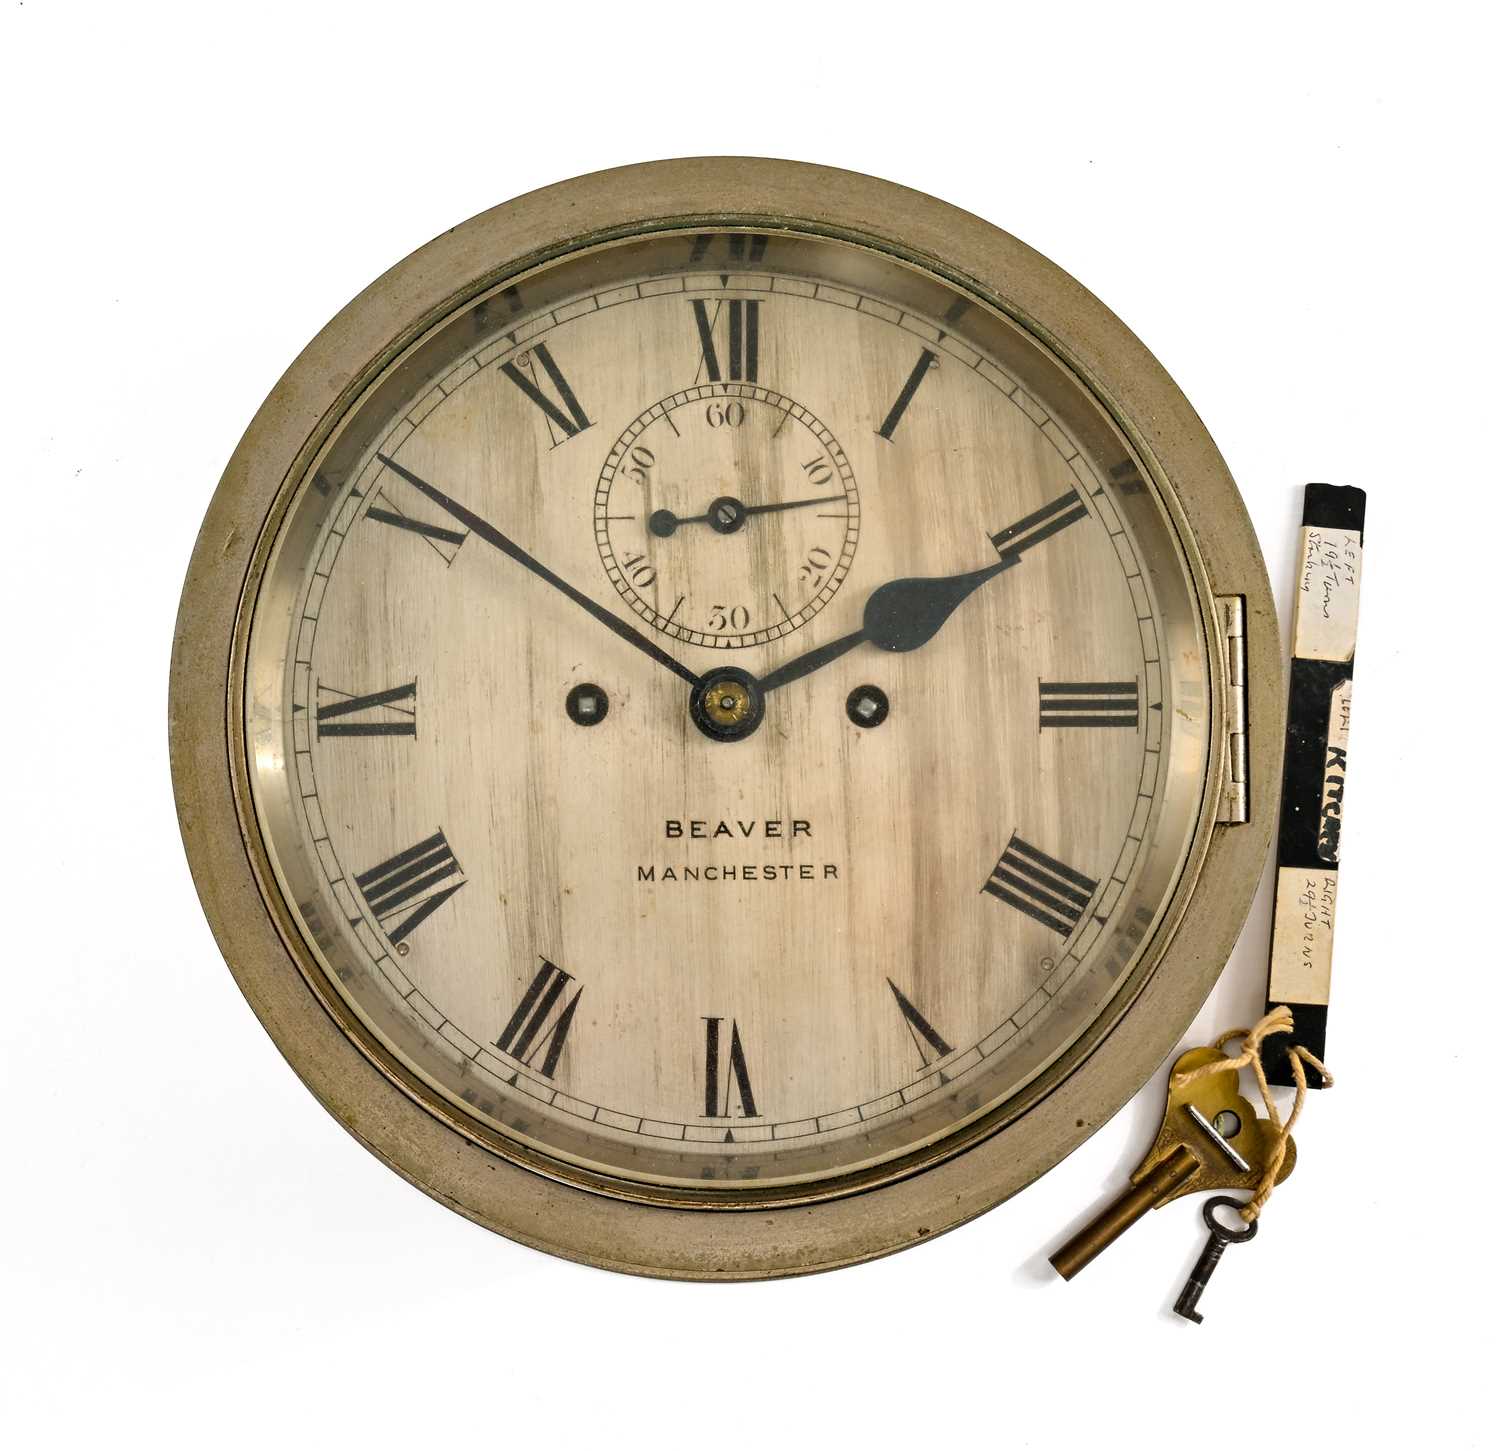 SHIP'S BULKHEAD CLOCK, the dial marked 'Beaver Manchester' with subsidiary seconds dial, two train